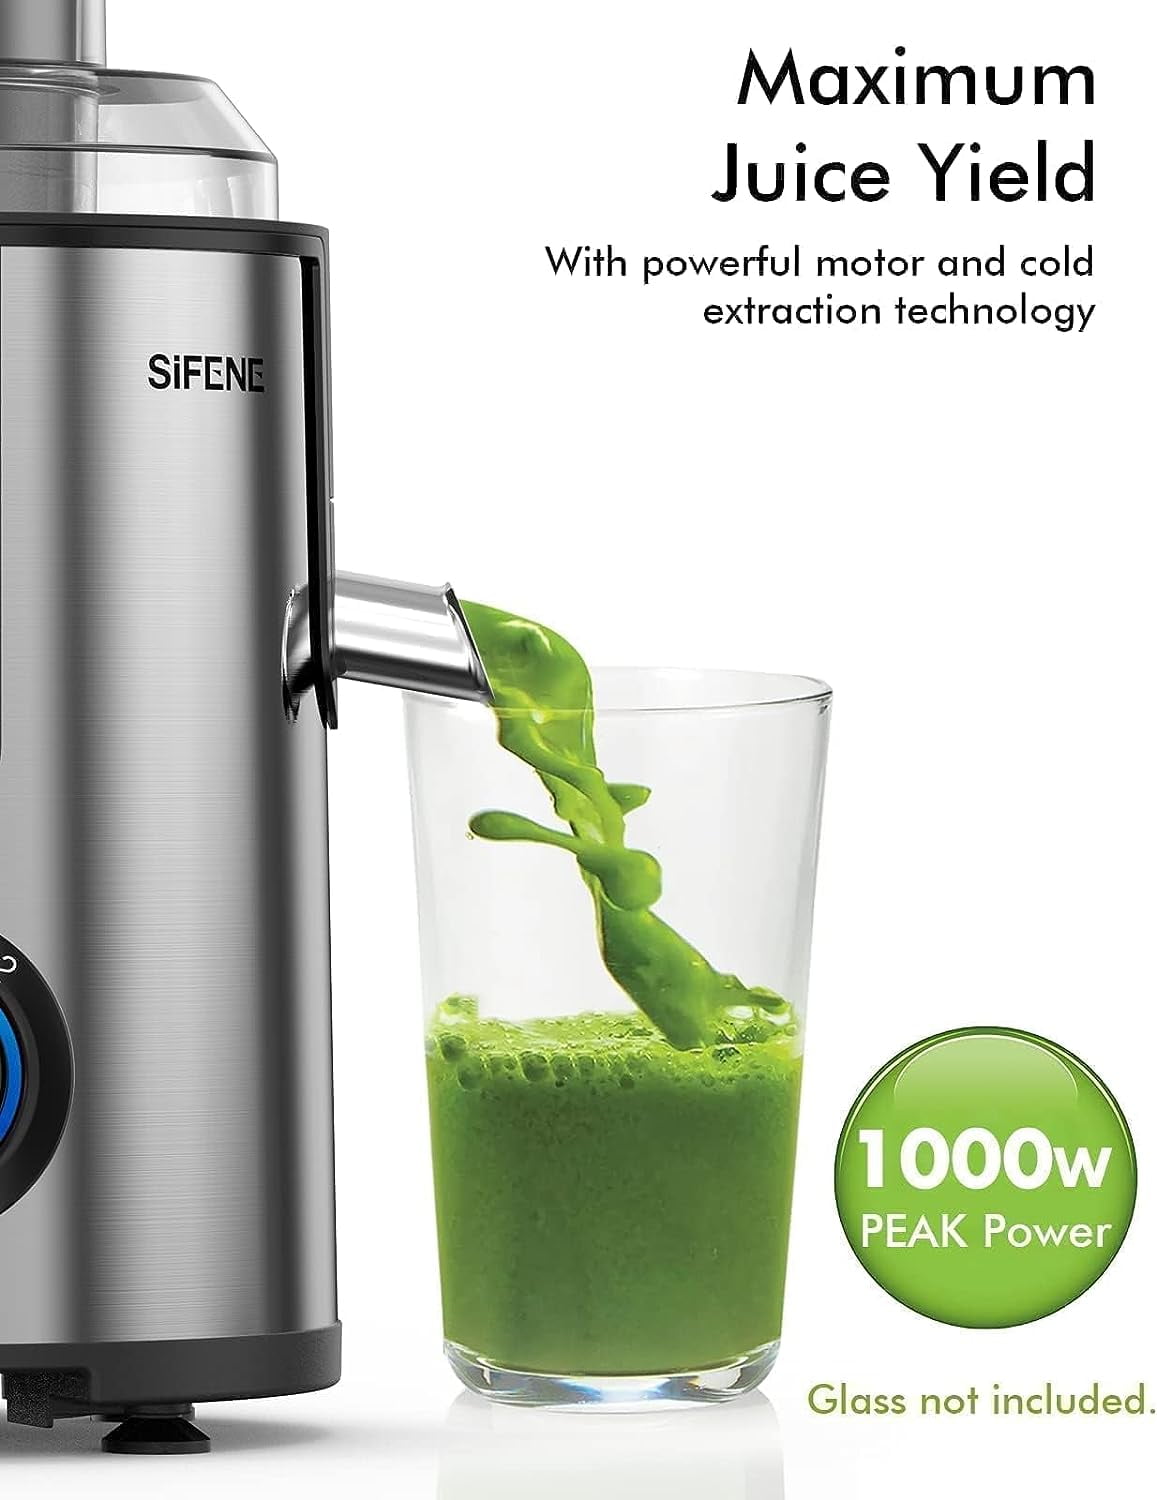 SiFENE Juicer Machine, 800W Centrifugal Juicer with 3.2 Big Mouth for Whole Fruits and Veggies, Juice Extractor Maker with 3 Speeds Settings, Easy